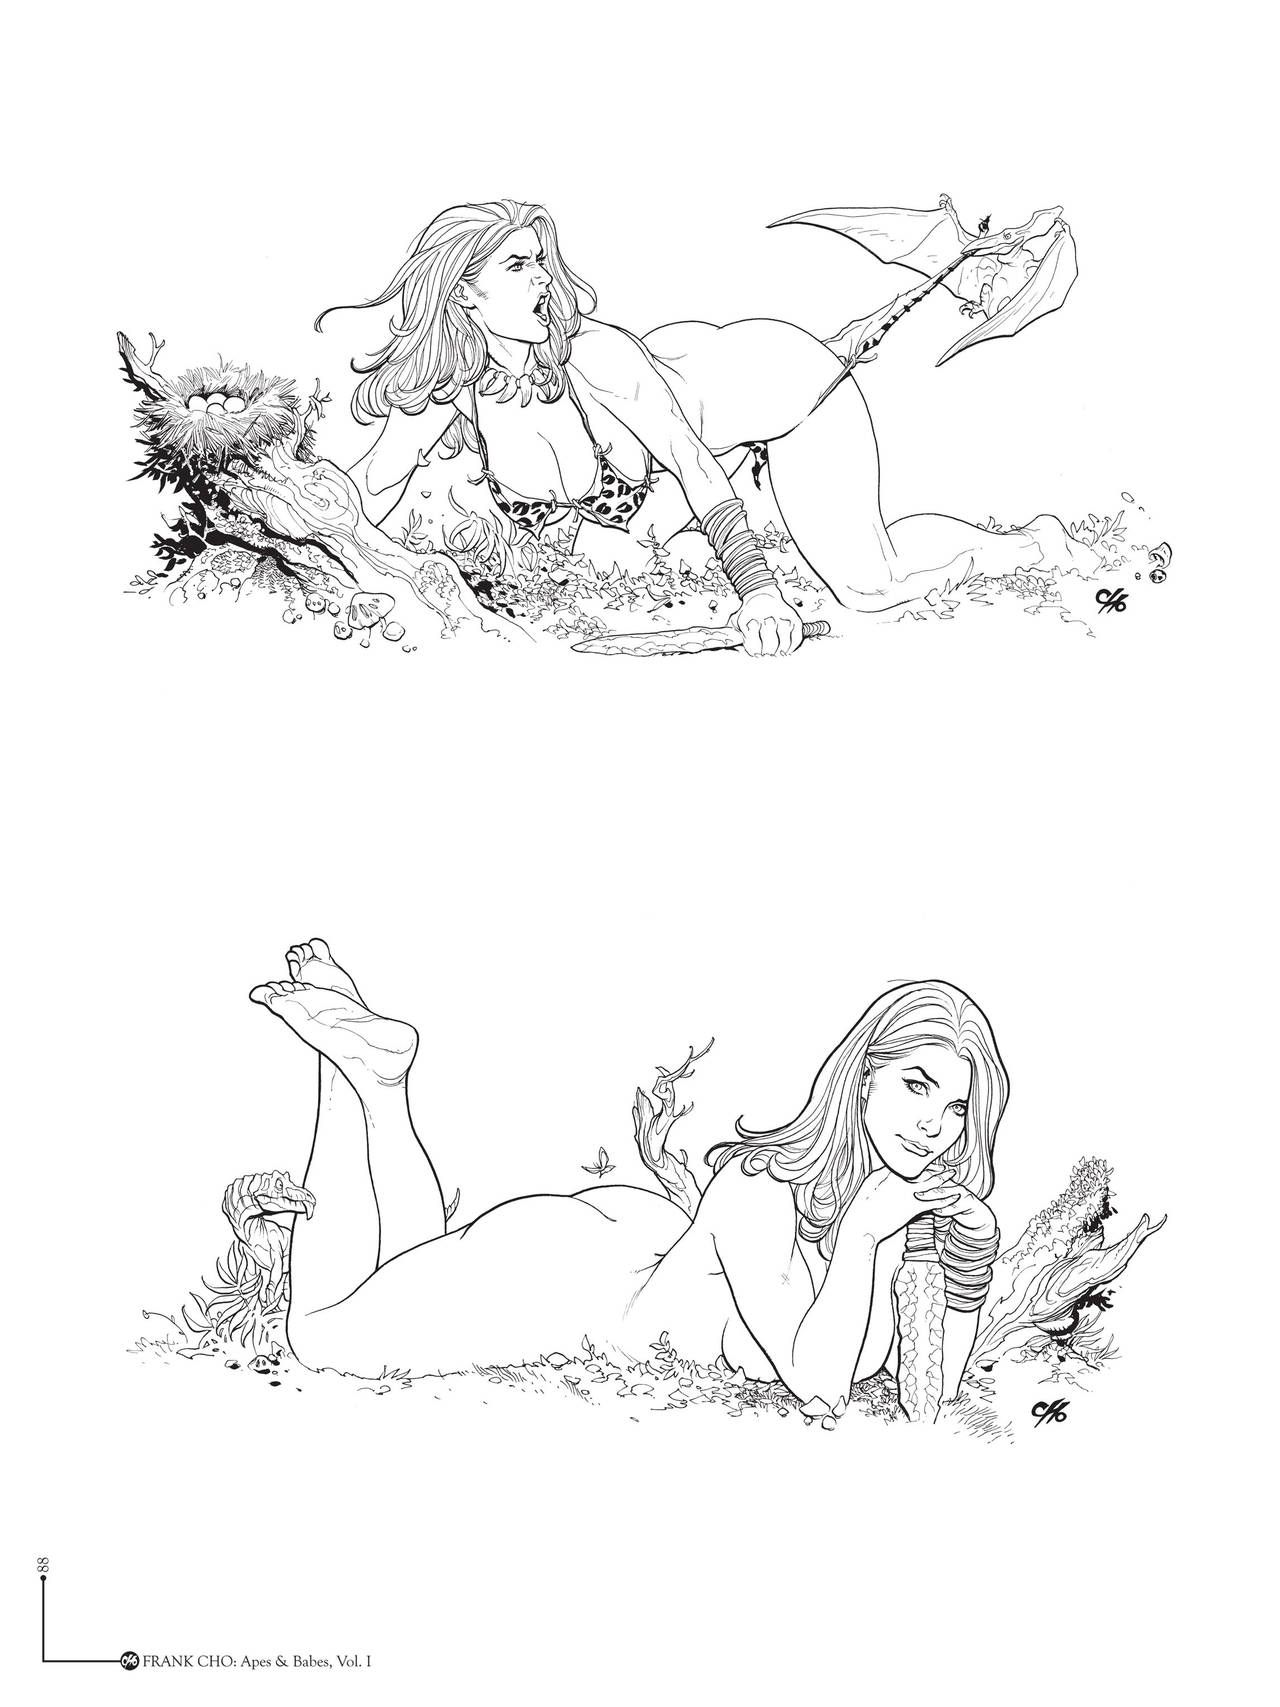 [Frank Cho] Apes & Babes: The Art Of Frank Cho 88